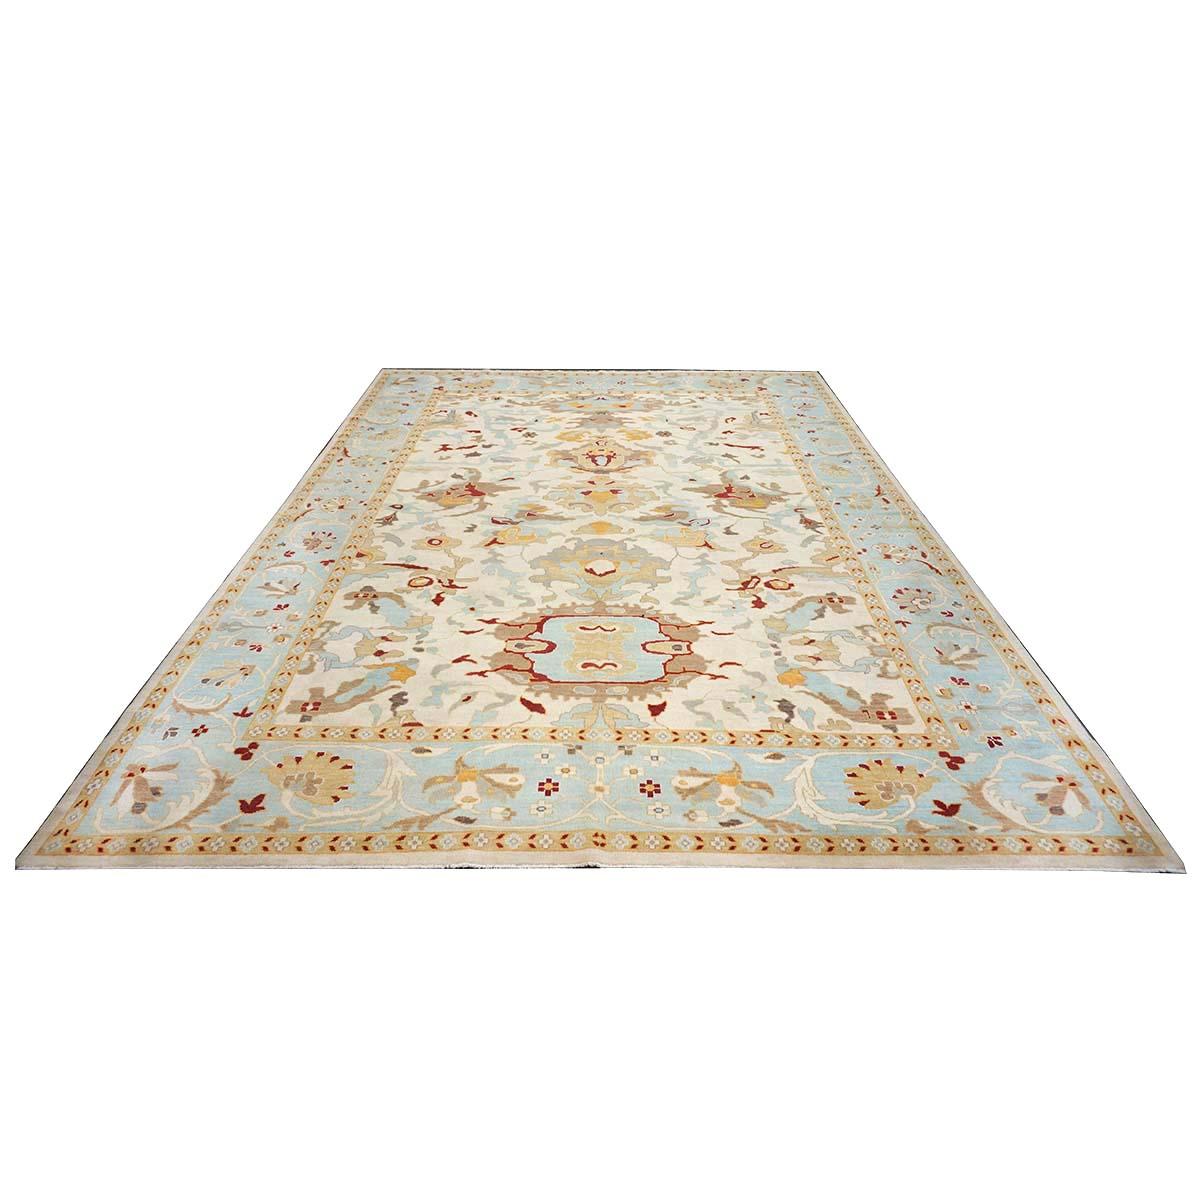 Ashly Fine Rugs presents an antique recreation of an original Persian Sultanabad 10x14 Blue & Ivory Handmade Area Rug. Part of our own previous production, this antique recreation was thought of and created in-house and 100% handmade in Afghanistan